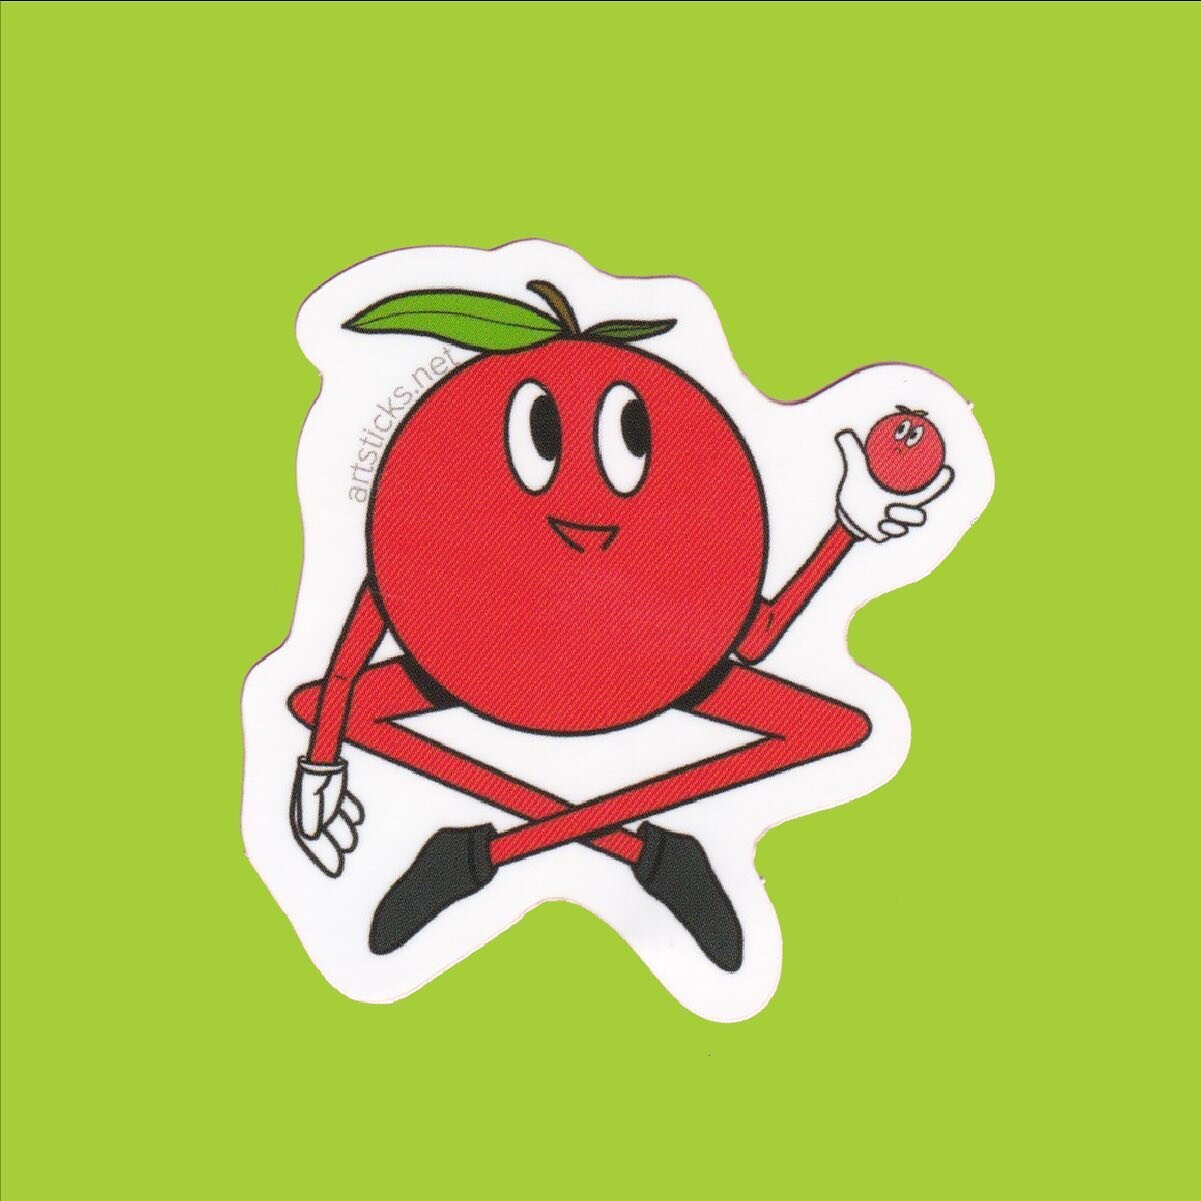 An apple about to eat an apple?! 😱 Series 8 sticker by @lilylizabeth.art found only in machines right now! Check out our virtual machine to spin the wheel and see what sticker you get.